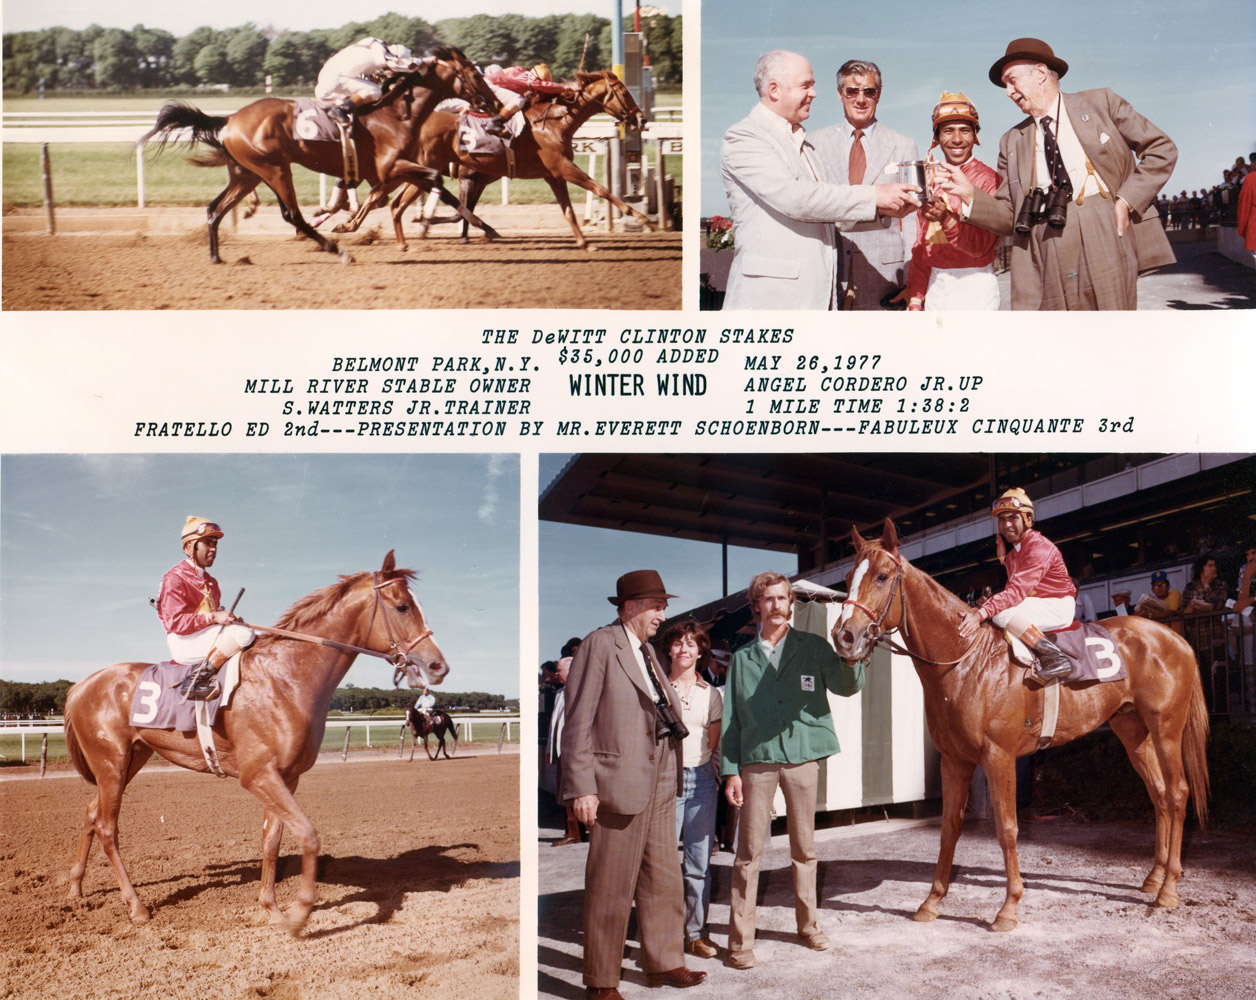 Win composite photograph from the 1977 DeWitt Clinton Stakes at Belmont, won by Winter Wind (Angel Cordero, Jr. up), trained by Sidney Watters, Jr. (NYRA/Museum Collection)